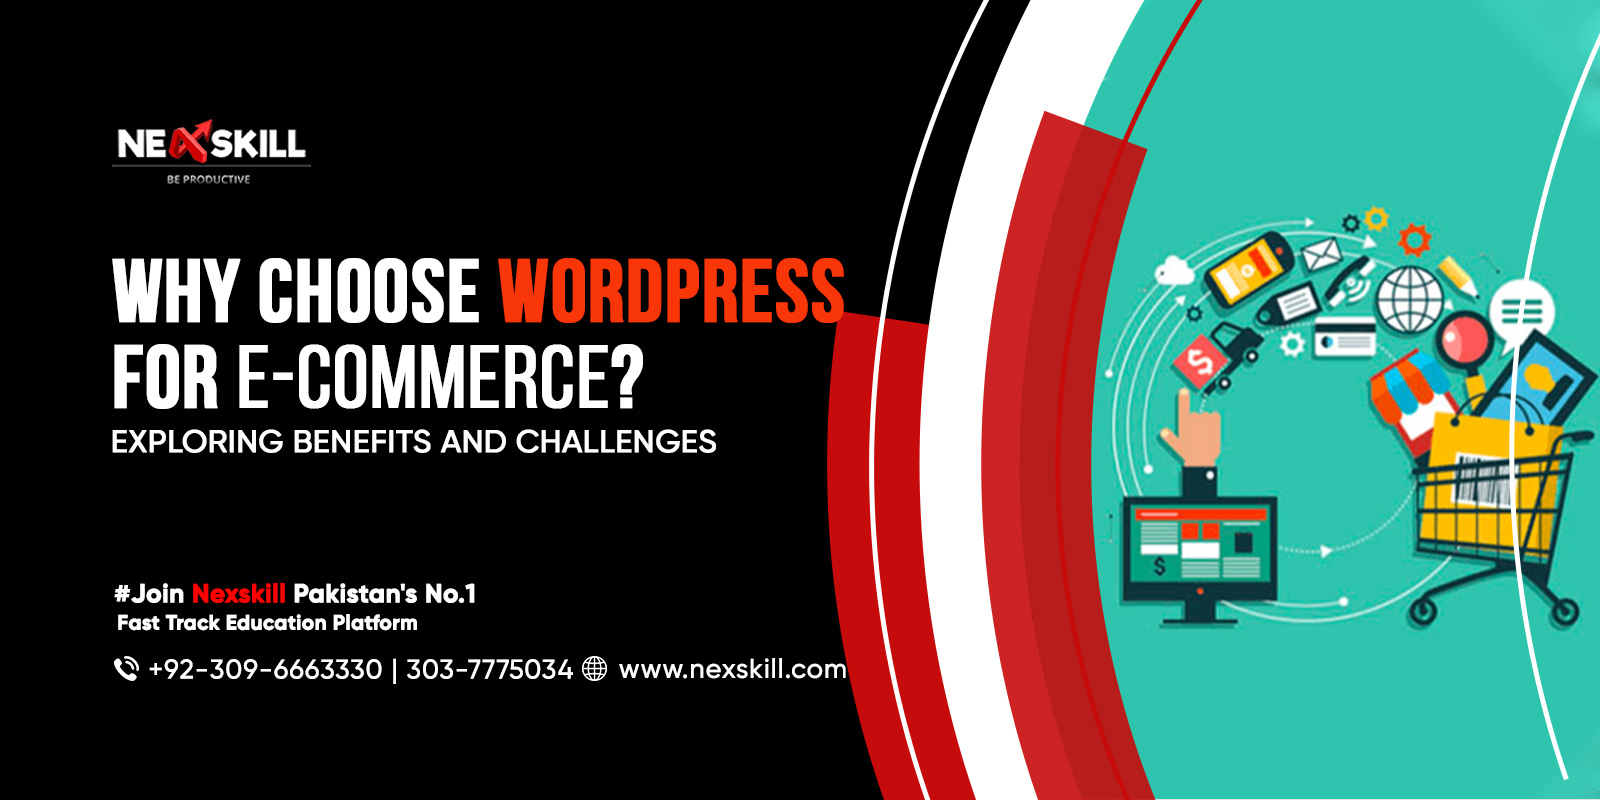 Why Choose WordPress for E-Commerce? Exploring Benefits and Challenges